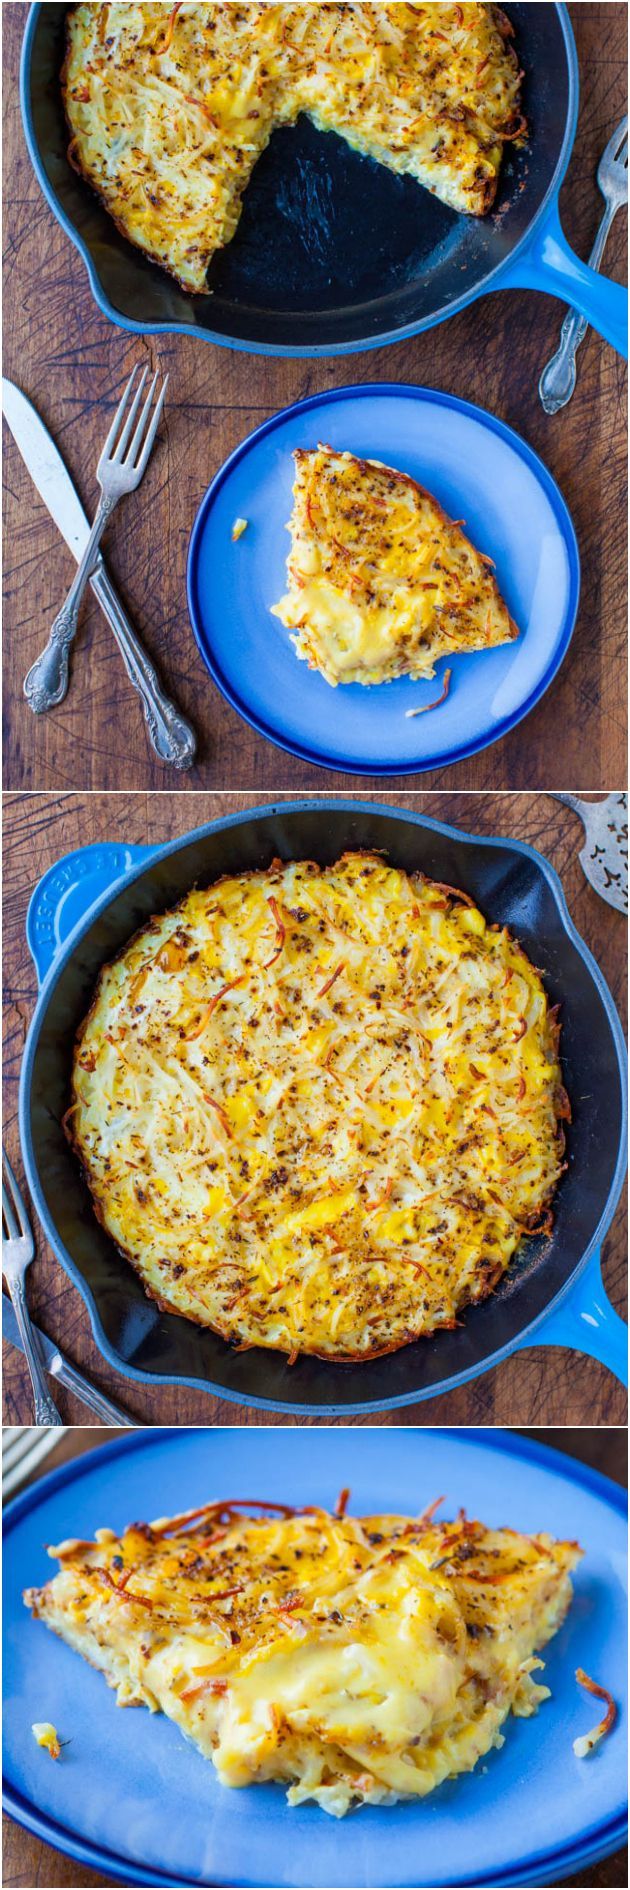 Creamy and Crispy Hash Browns Frittata – Potatoes and eggs in an easy one-skillet meal! Love this easy comfort food recipe!